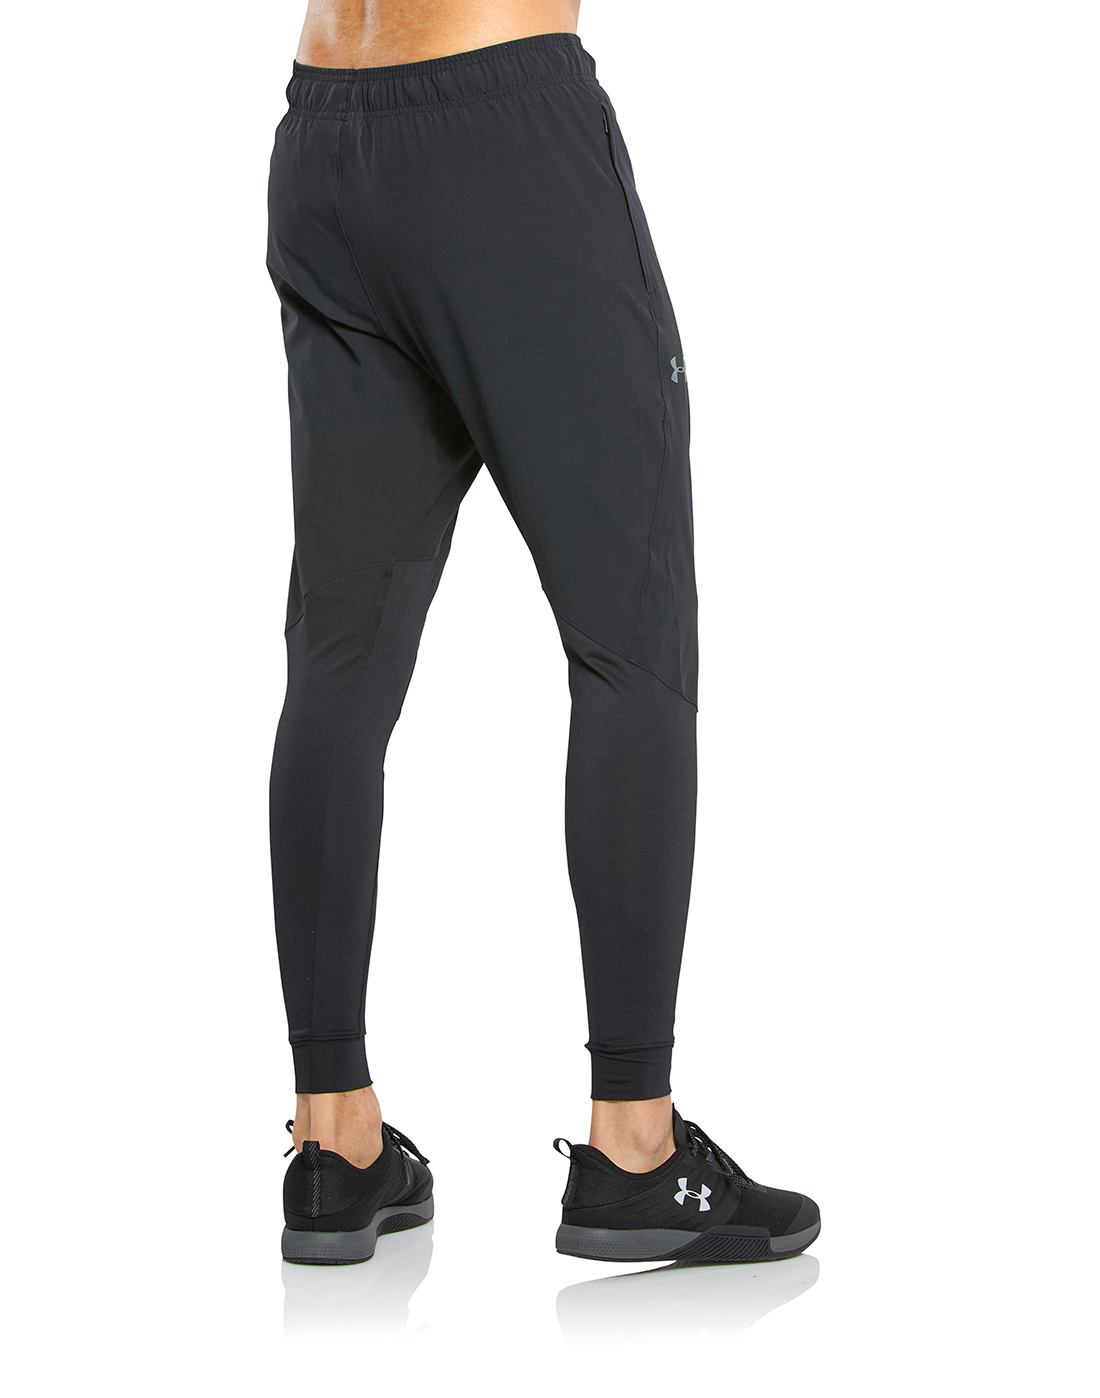 Under Armour Mens Hybrid Pants - Black | Life Style Sports IE